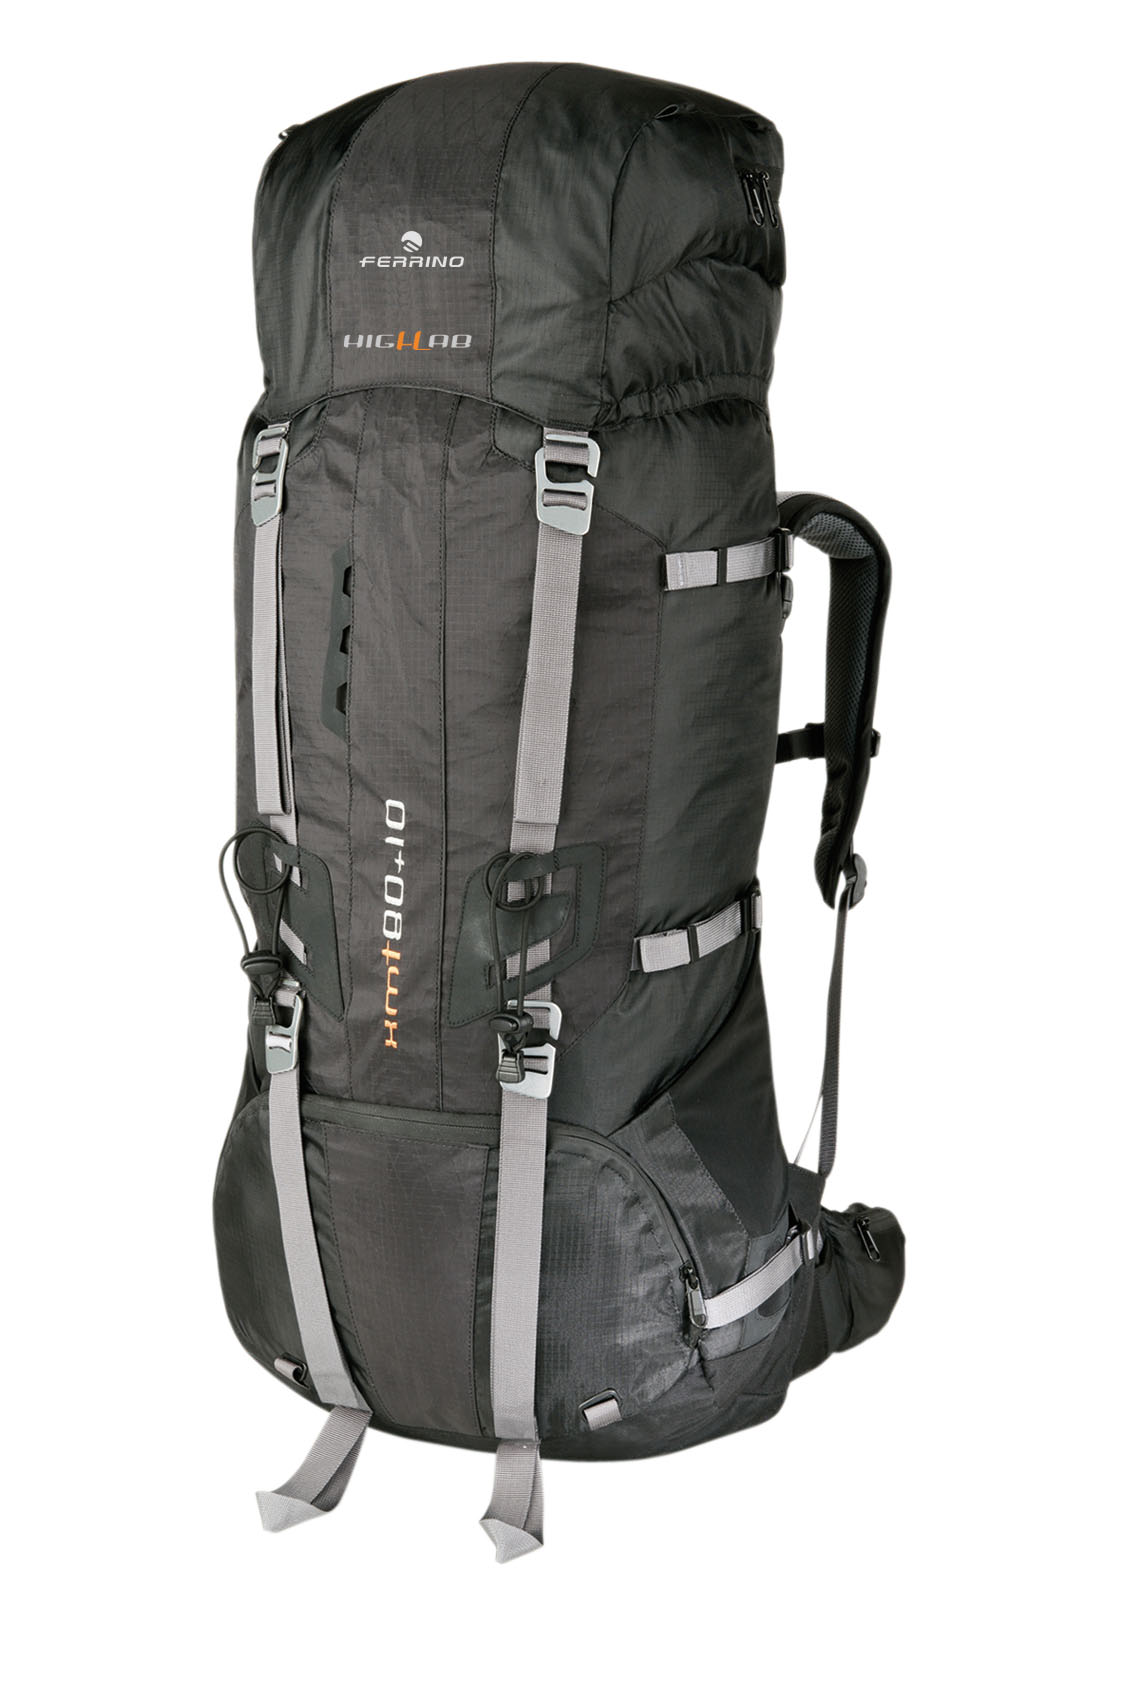 XMT 80+10 backpack